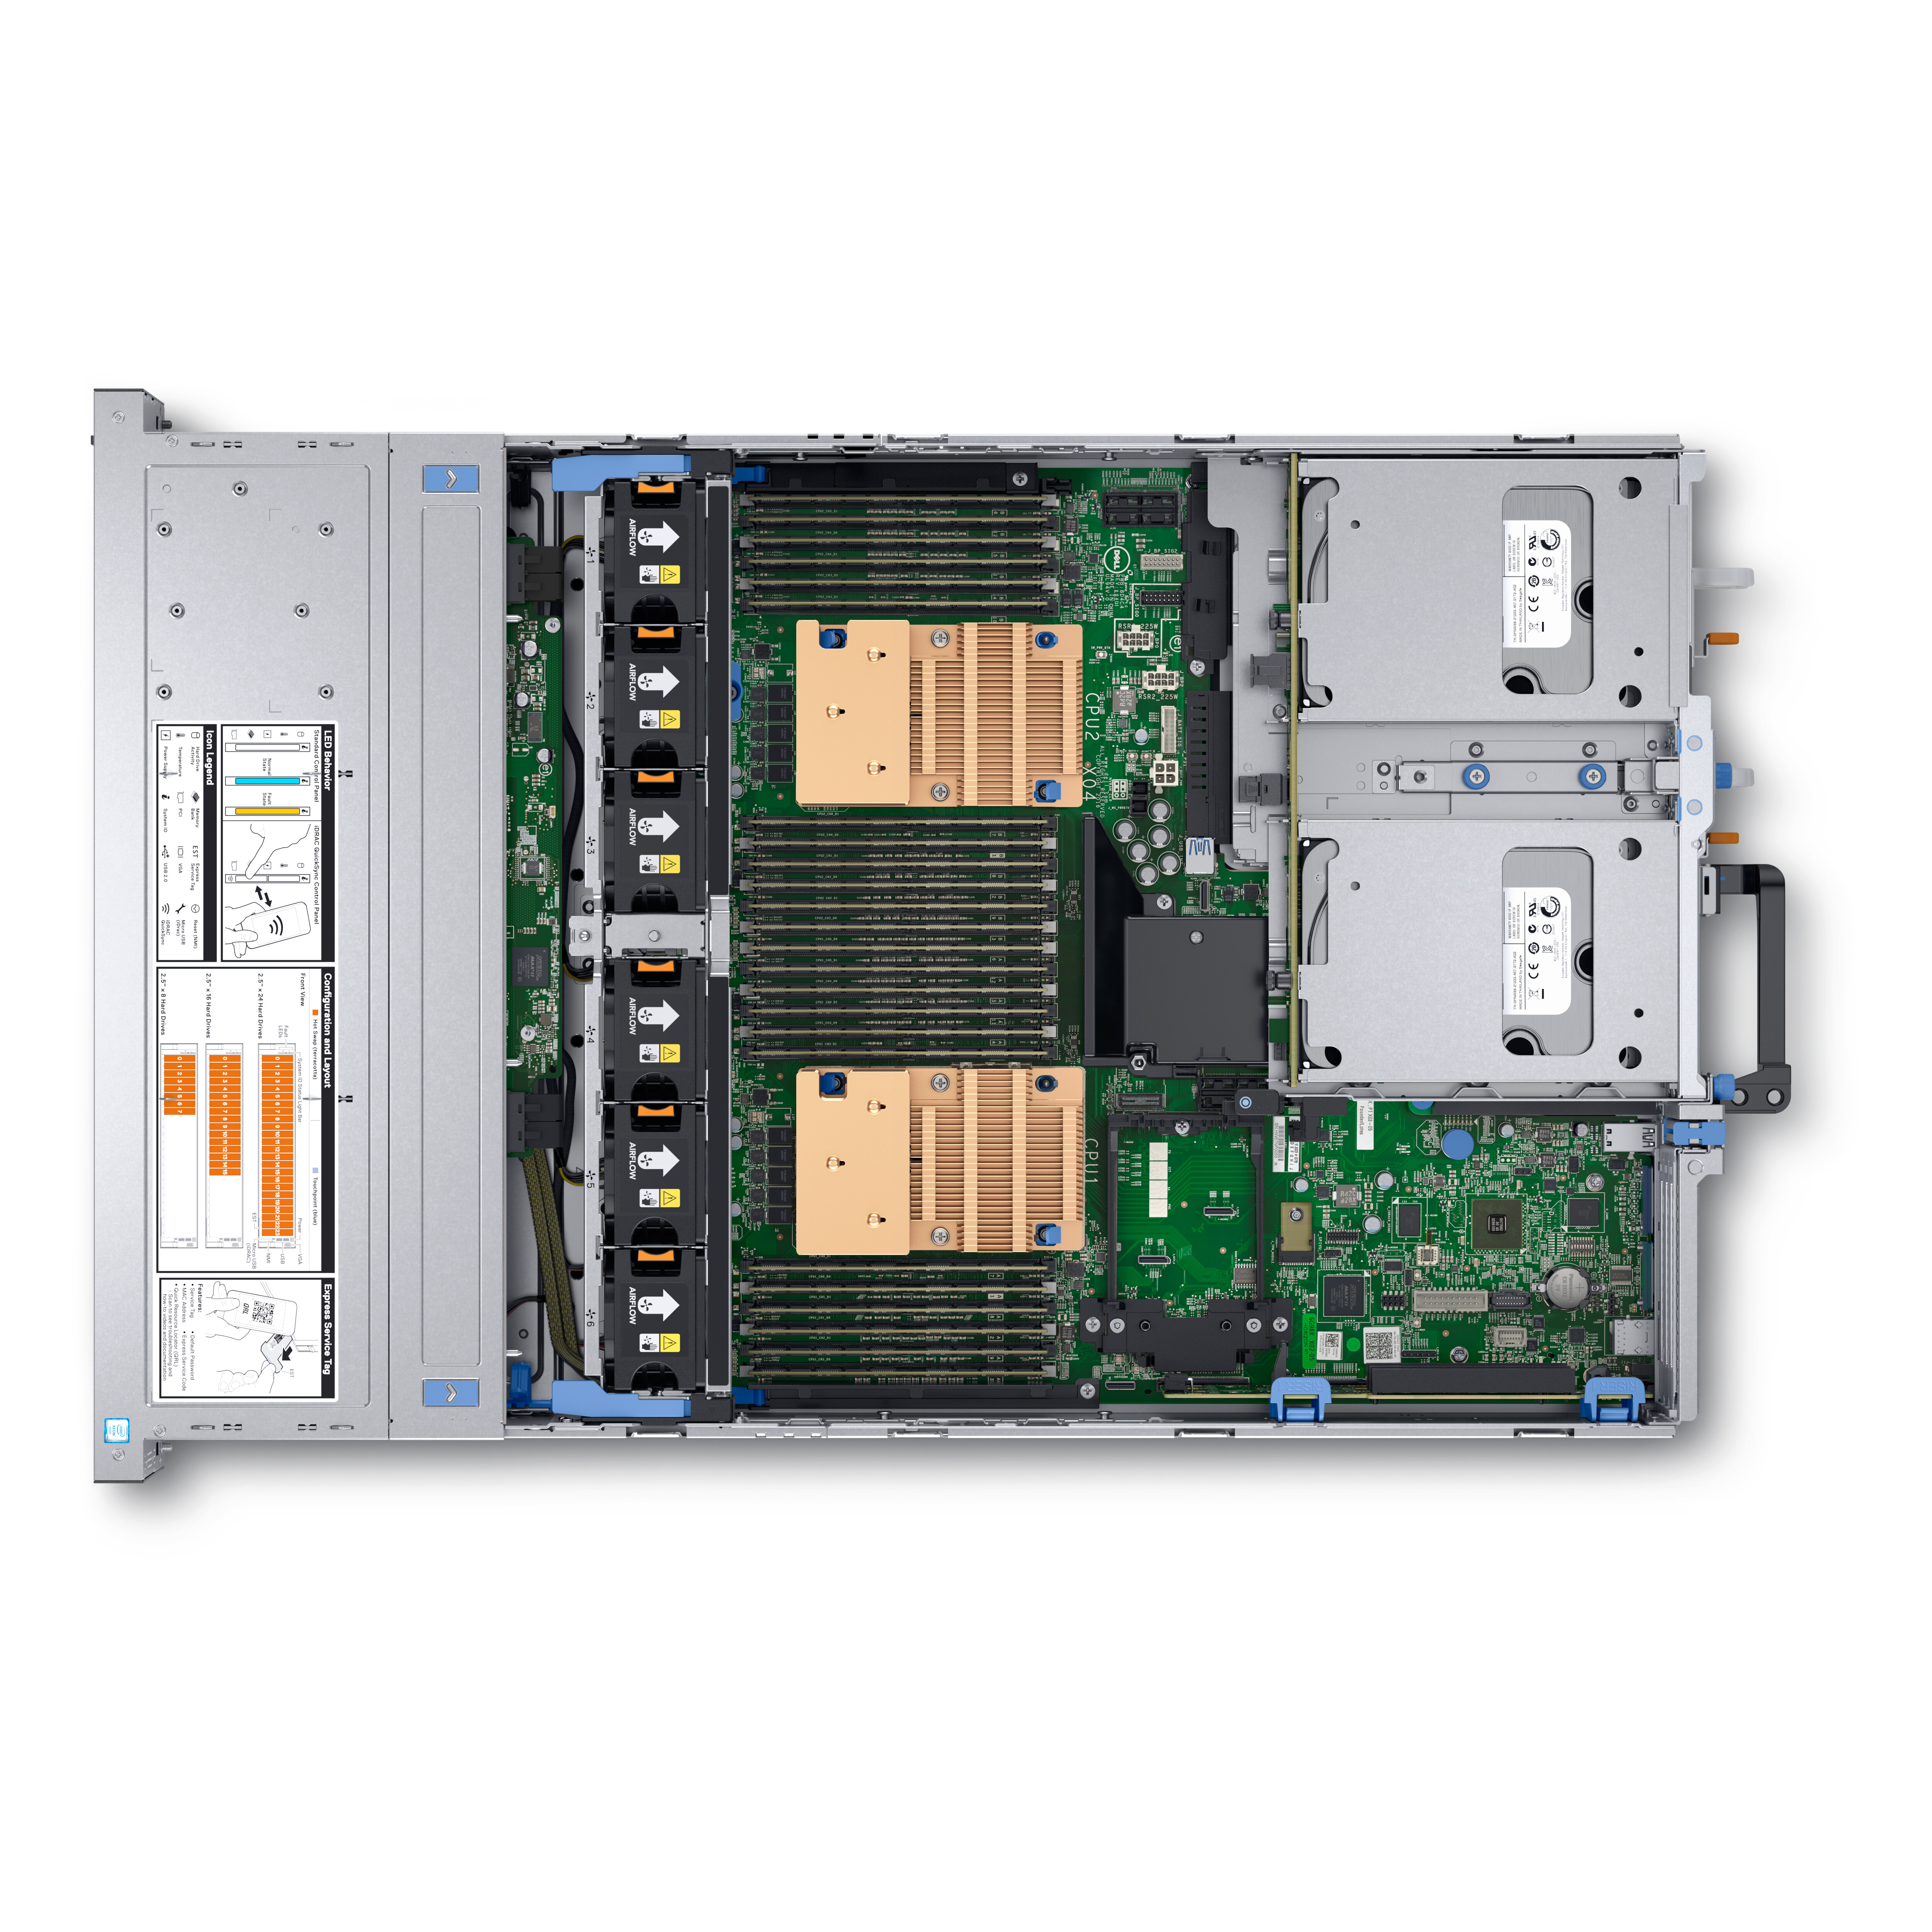 https://i.dell.com/is/image/DellContent/content/dam/images/products/servers/poweredge/r740xd/dellemc-per740xd-24x25-internal-8xpcie-4x3-5.psd?fmt=pjpg&pscan=auto&scl=1&wid=5000&hei=5000&qlt=100,1&resMode=sharp2&size=5000,5000&chrss=full&imwidth=5000